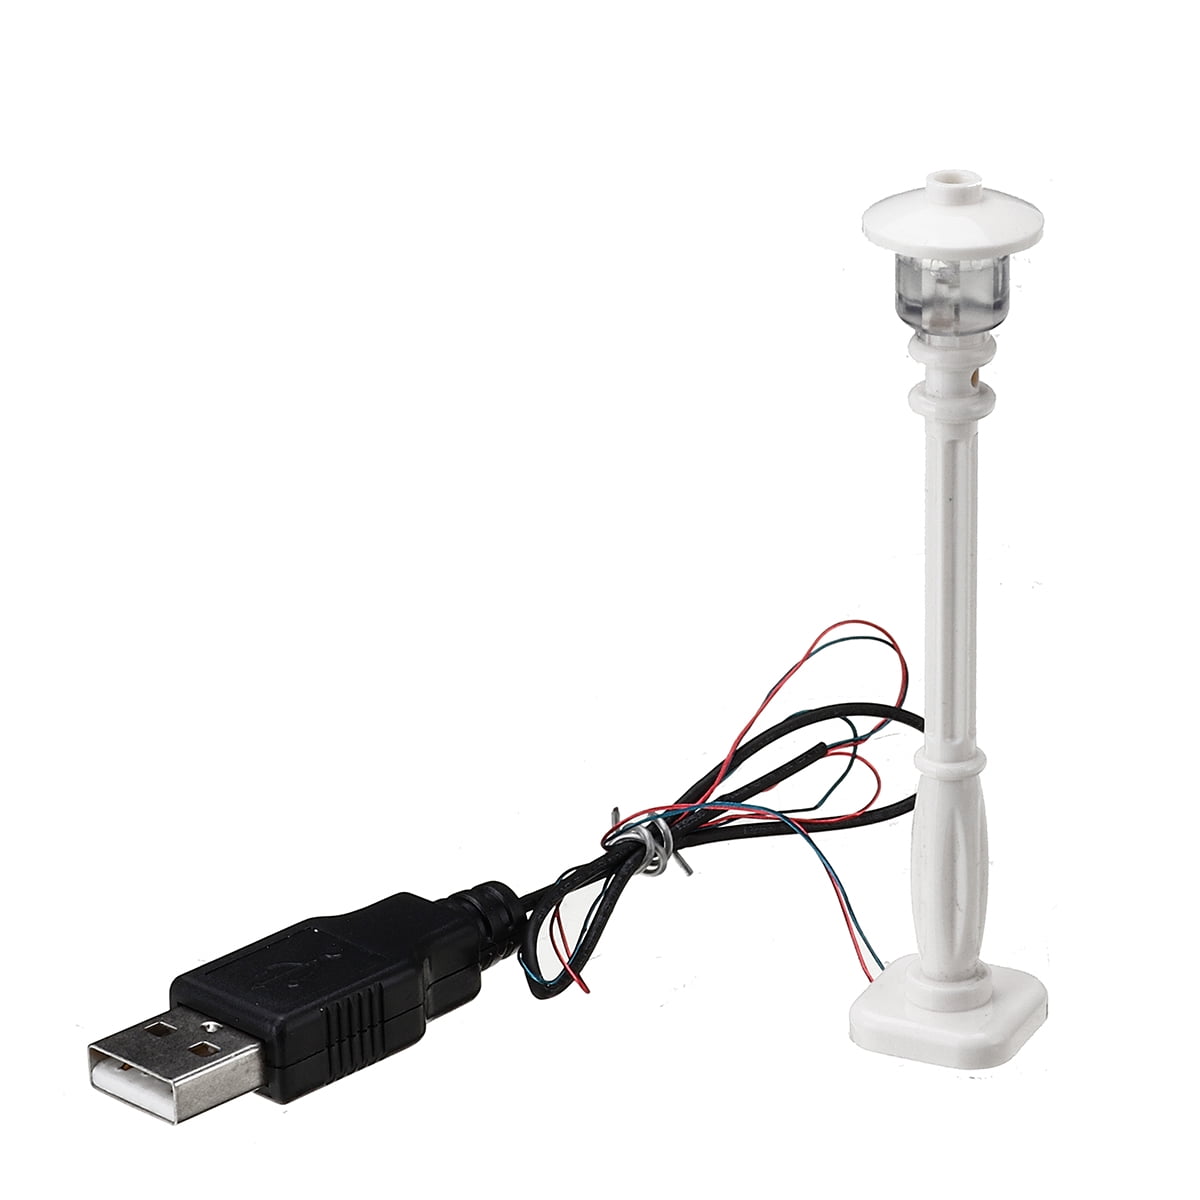 New 4 White Lamp Post led street light for lego usb connected 4 posts 